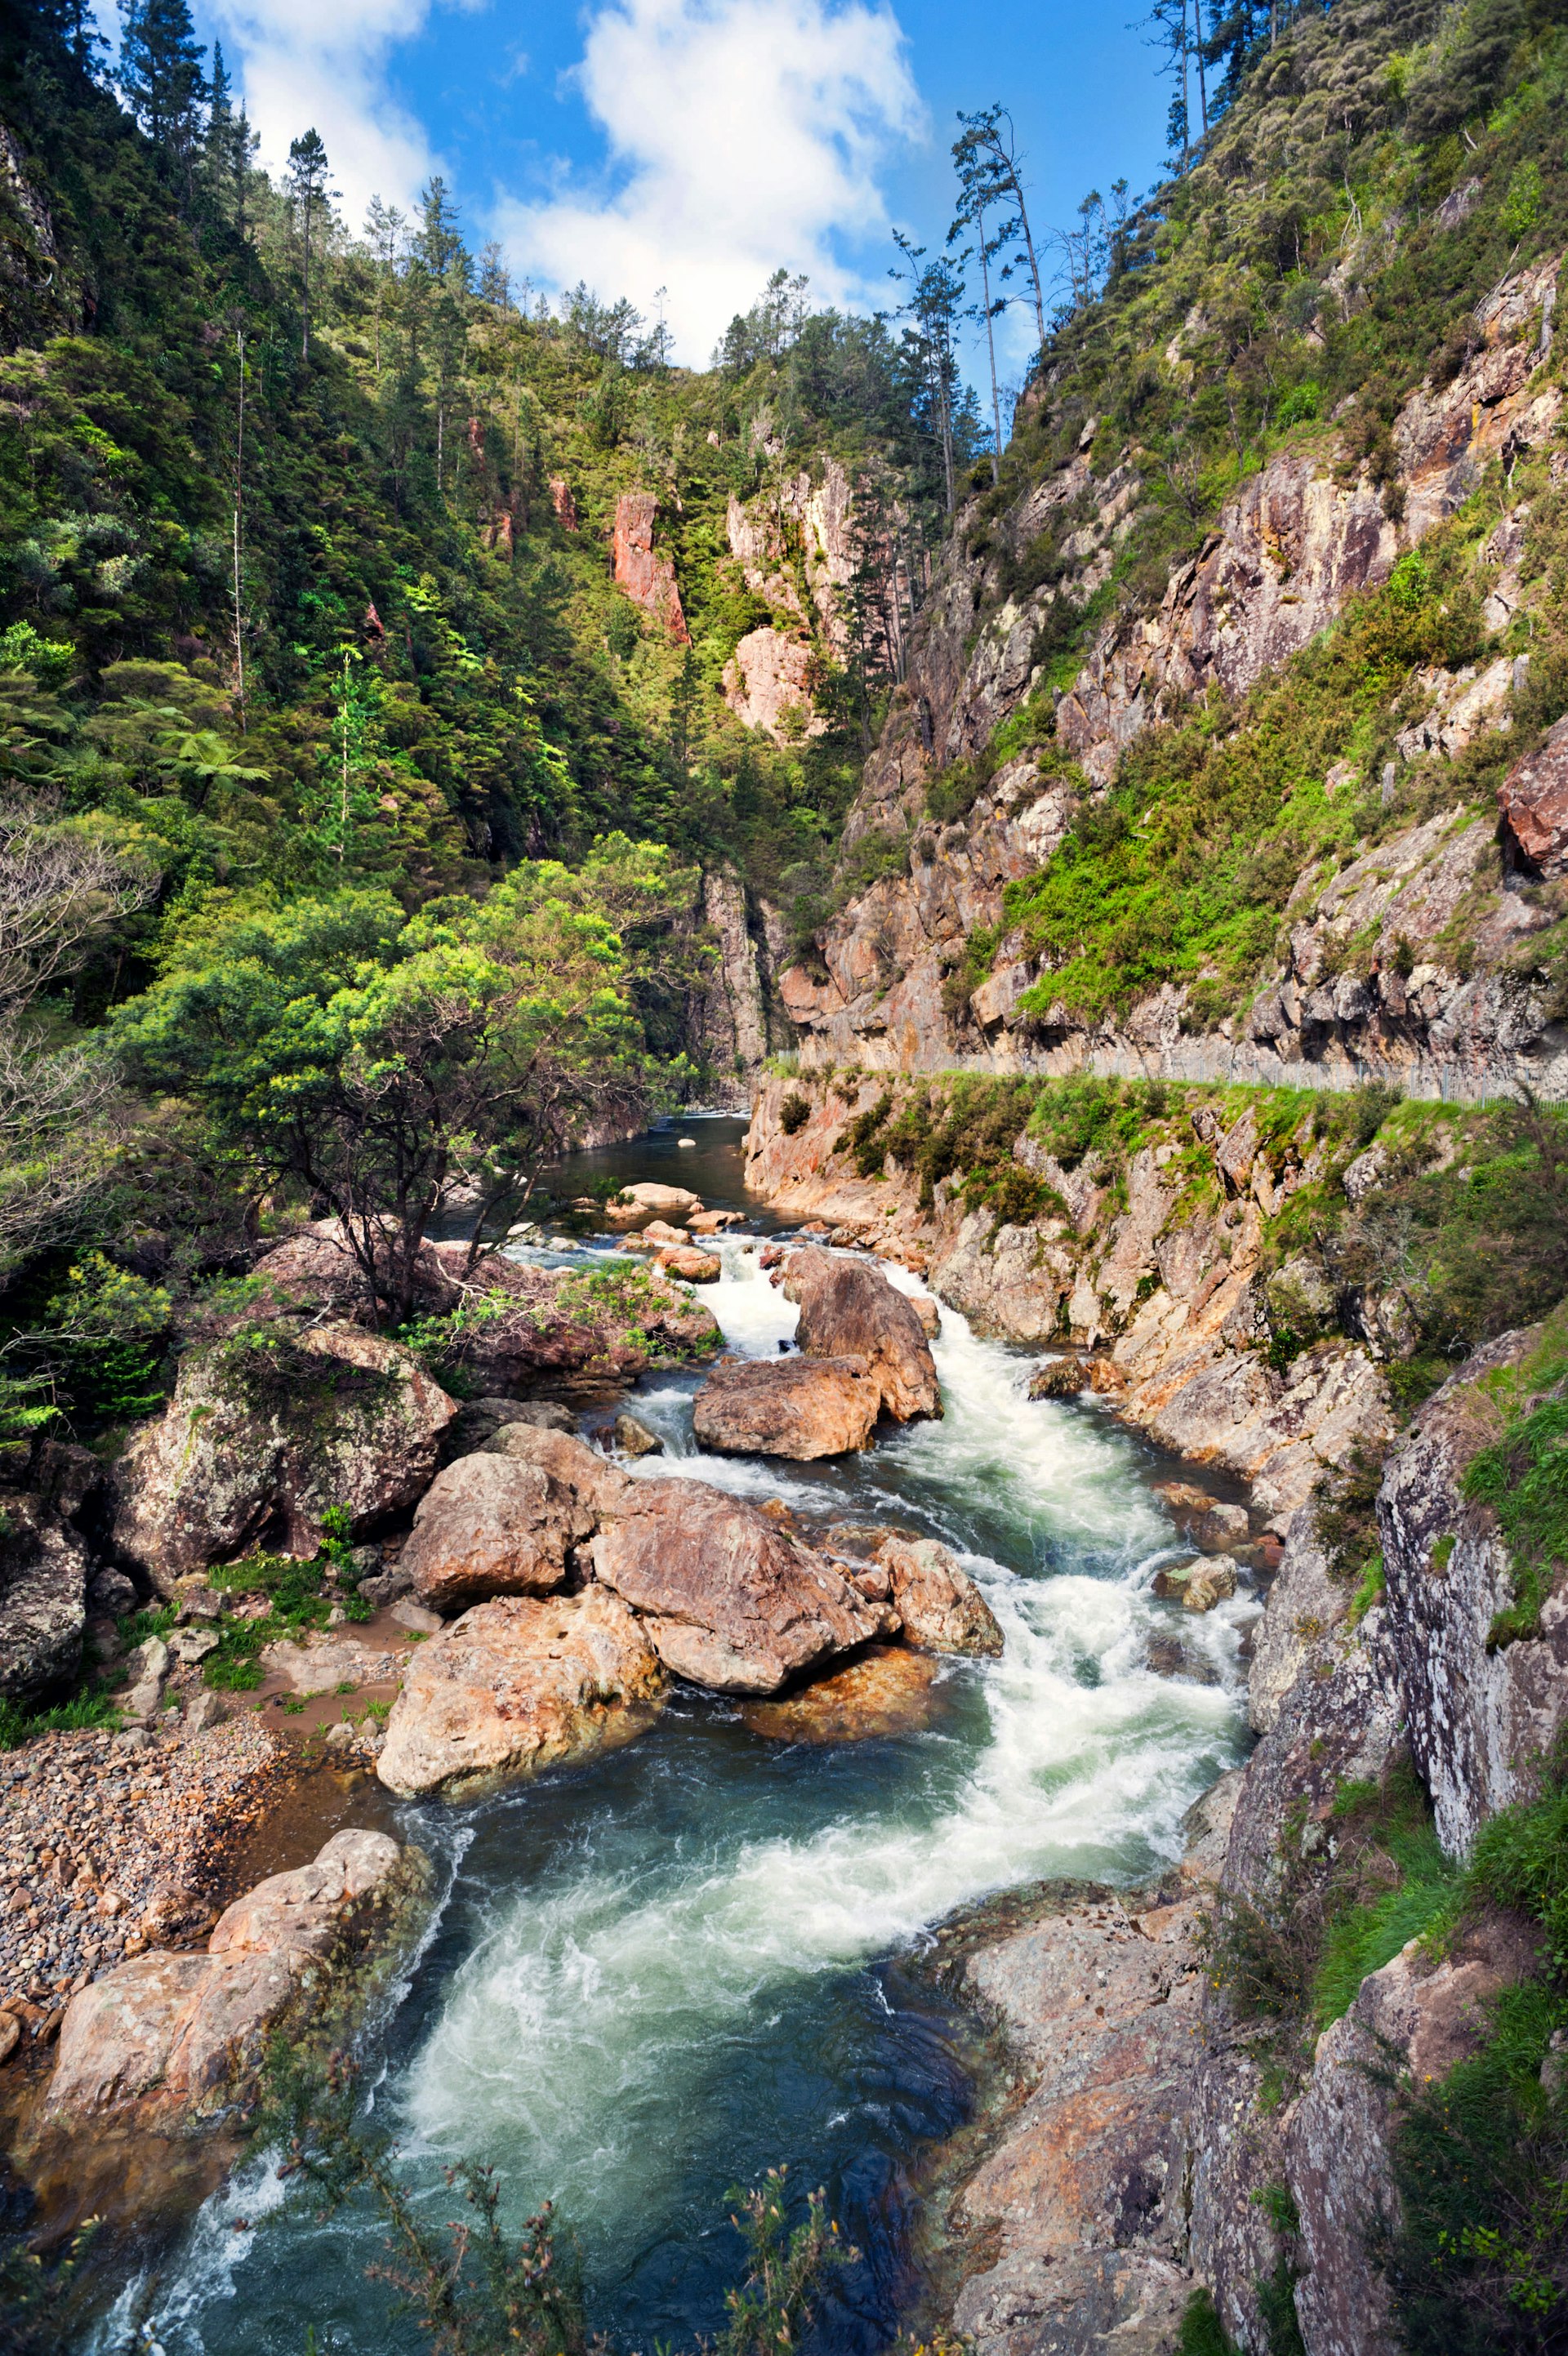 The spectacular Karangahake Gorge, Near Waihi, North Island, New Zealand. The Windows Walk can be seen passing above the river to the right.